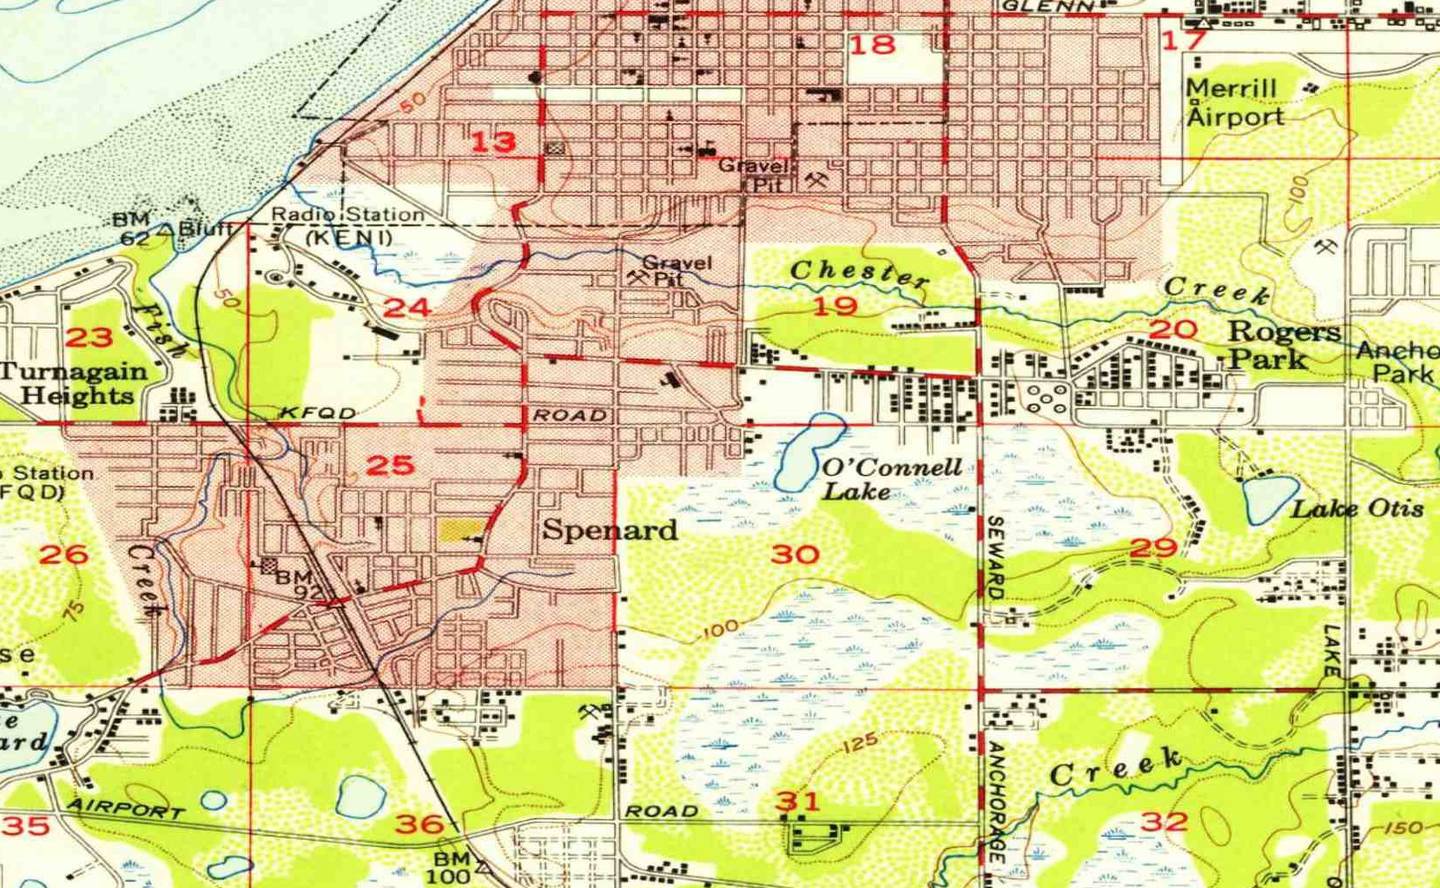 A 1953 USGS map of Anchorage, centered on Blueberry Lake/O'Connell Lake